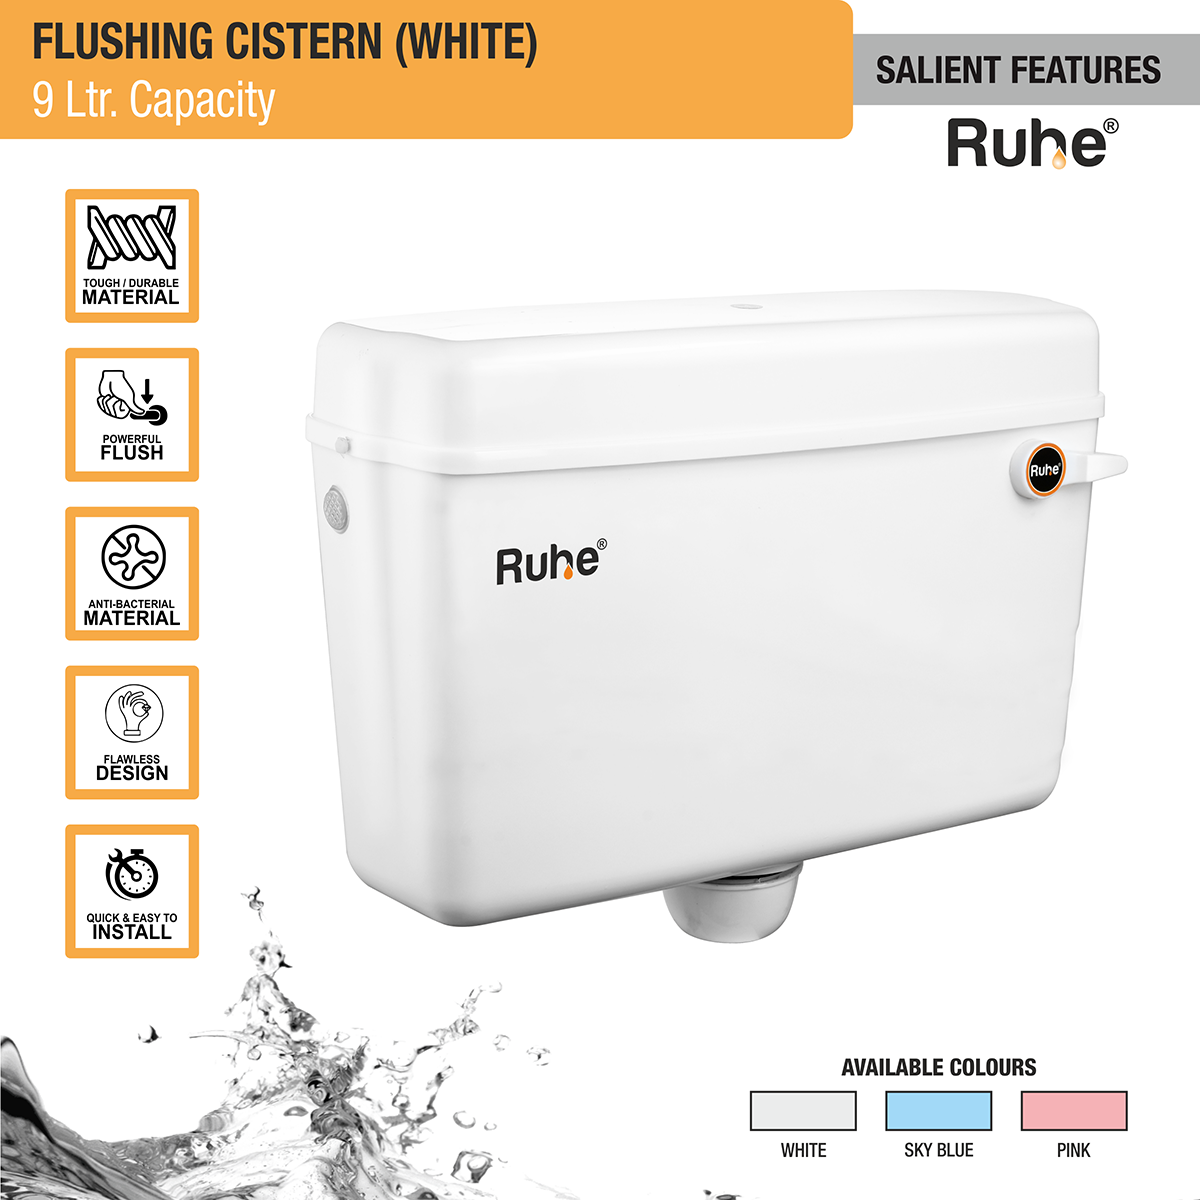 White Flushing Cistern (9 Ltr) features